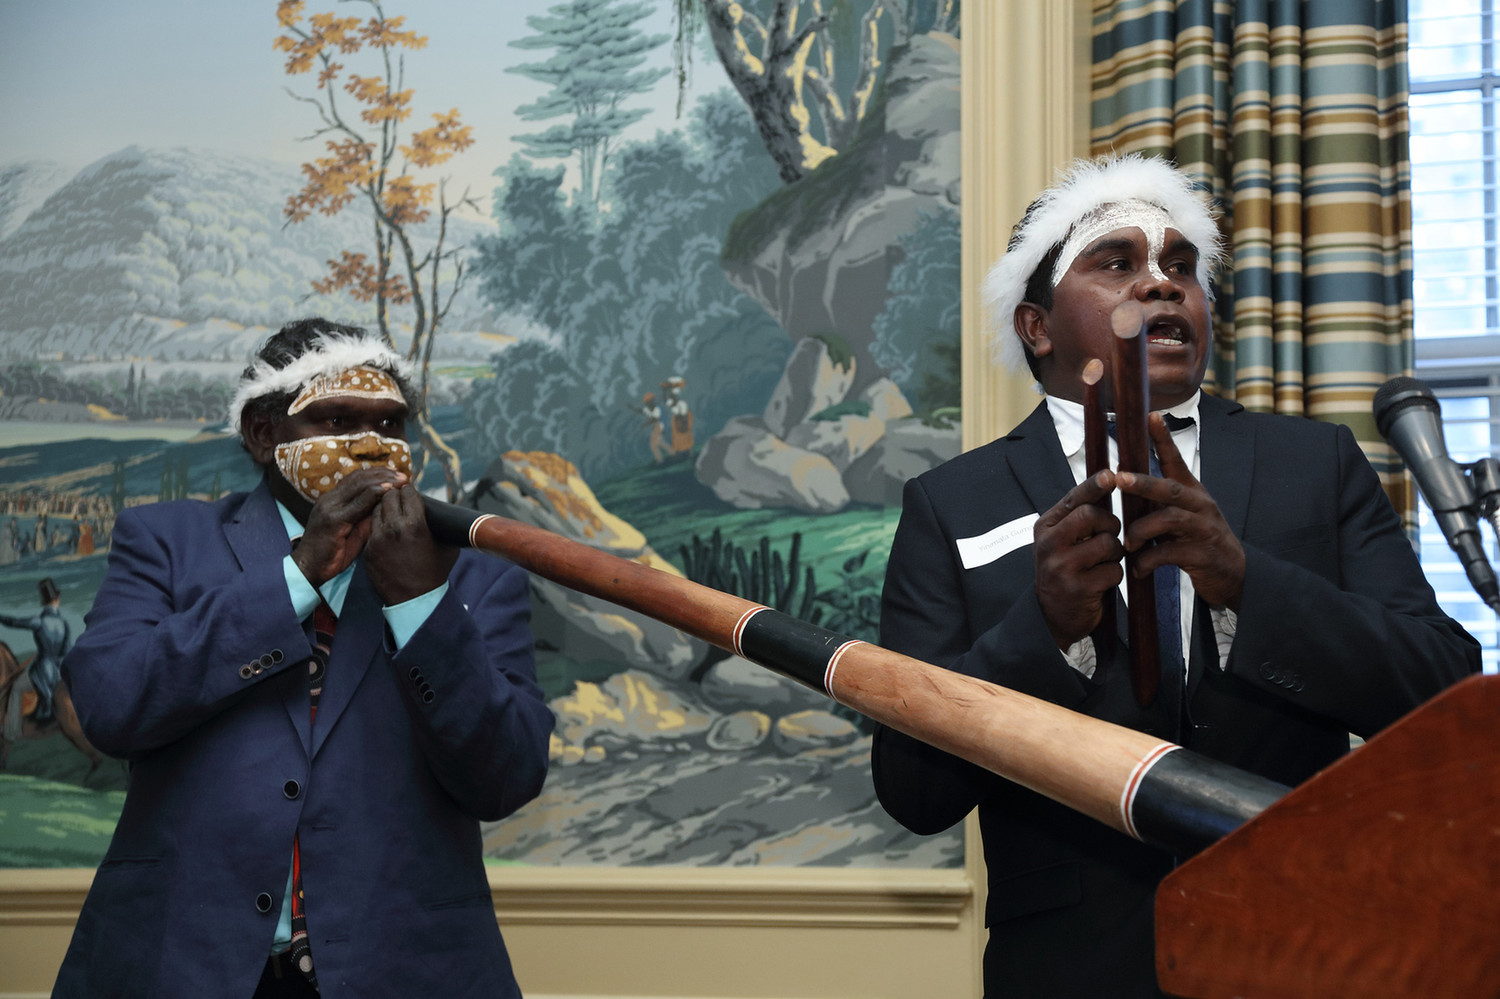 Wukun Wanambi and Yinimala Gumana performing a traditional Yolngu song at a reception to celebrate the launch of Madayin at the Yale Club of NYC in May Wukun Wanambi and Yinimala Gumana performing a traditional Yolngu song at a reception to celebrate the launch of Madayin at the Yale Club of NYC in May 